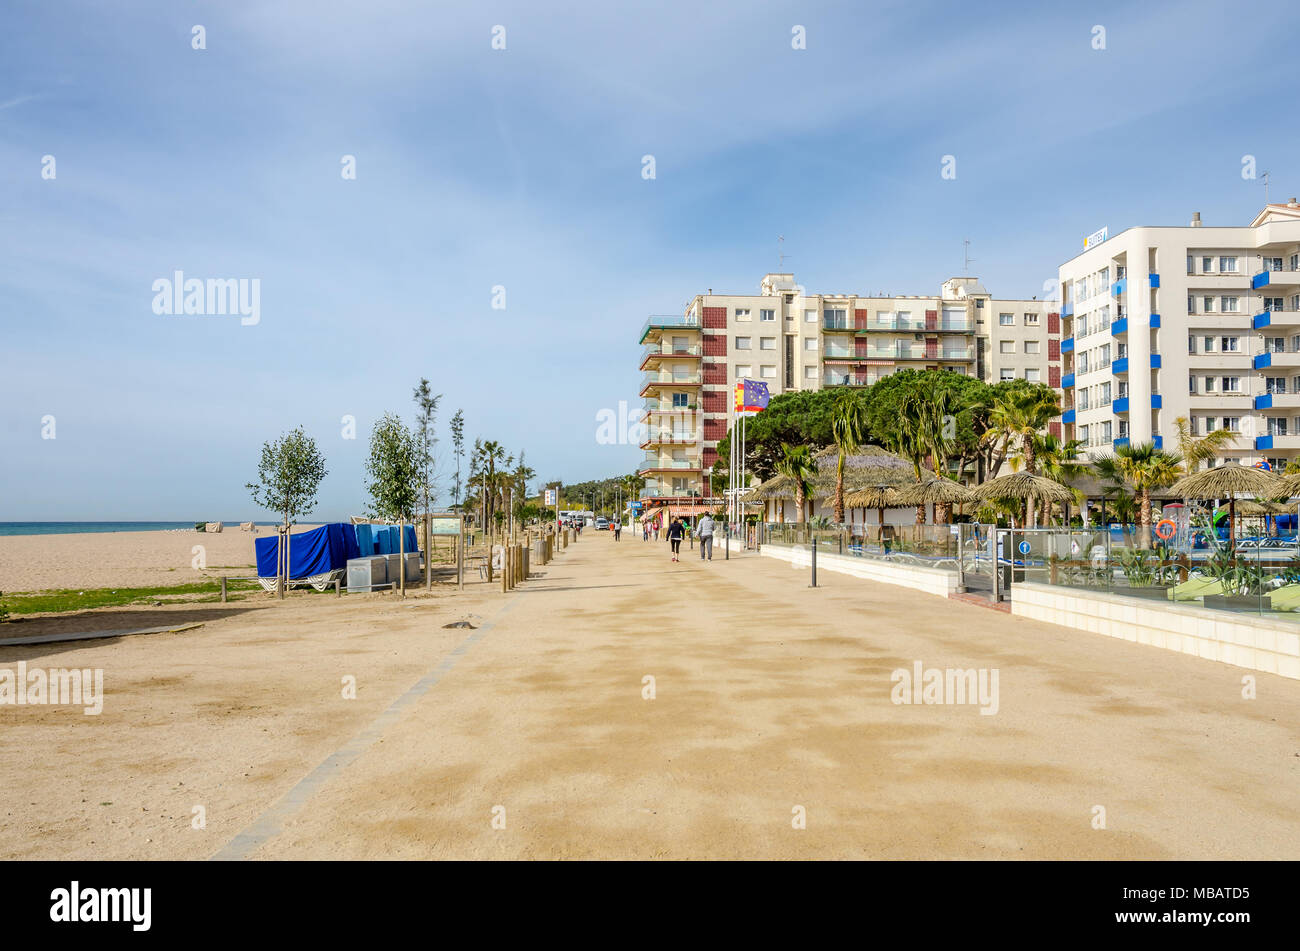 A view along an empty, sandy beach at Santa Susanna in the Costa Brava region of Spain. Hotels sit along the beach front Stock Photo